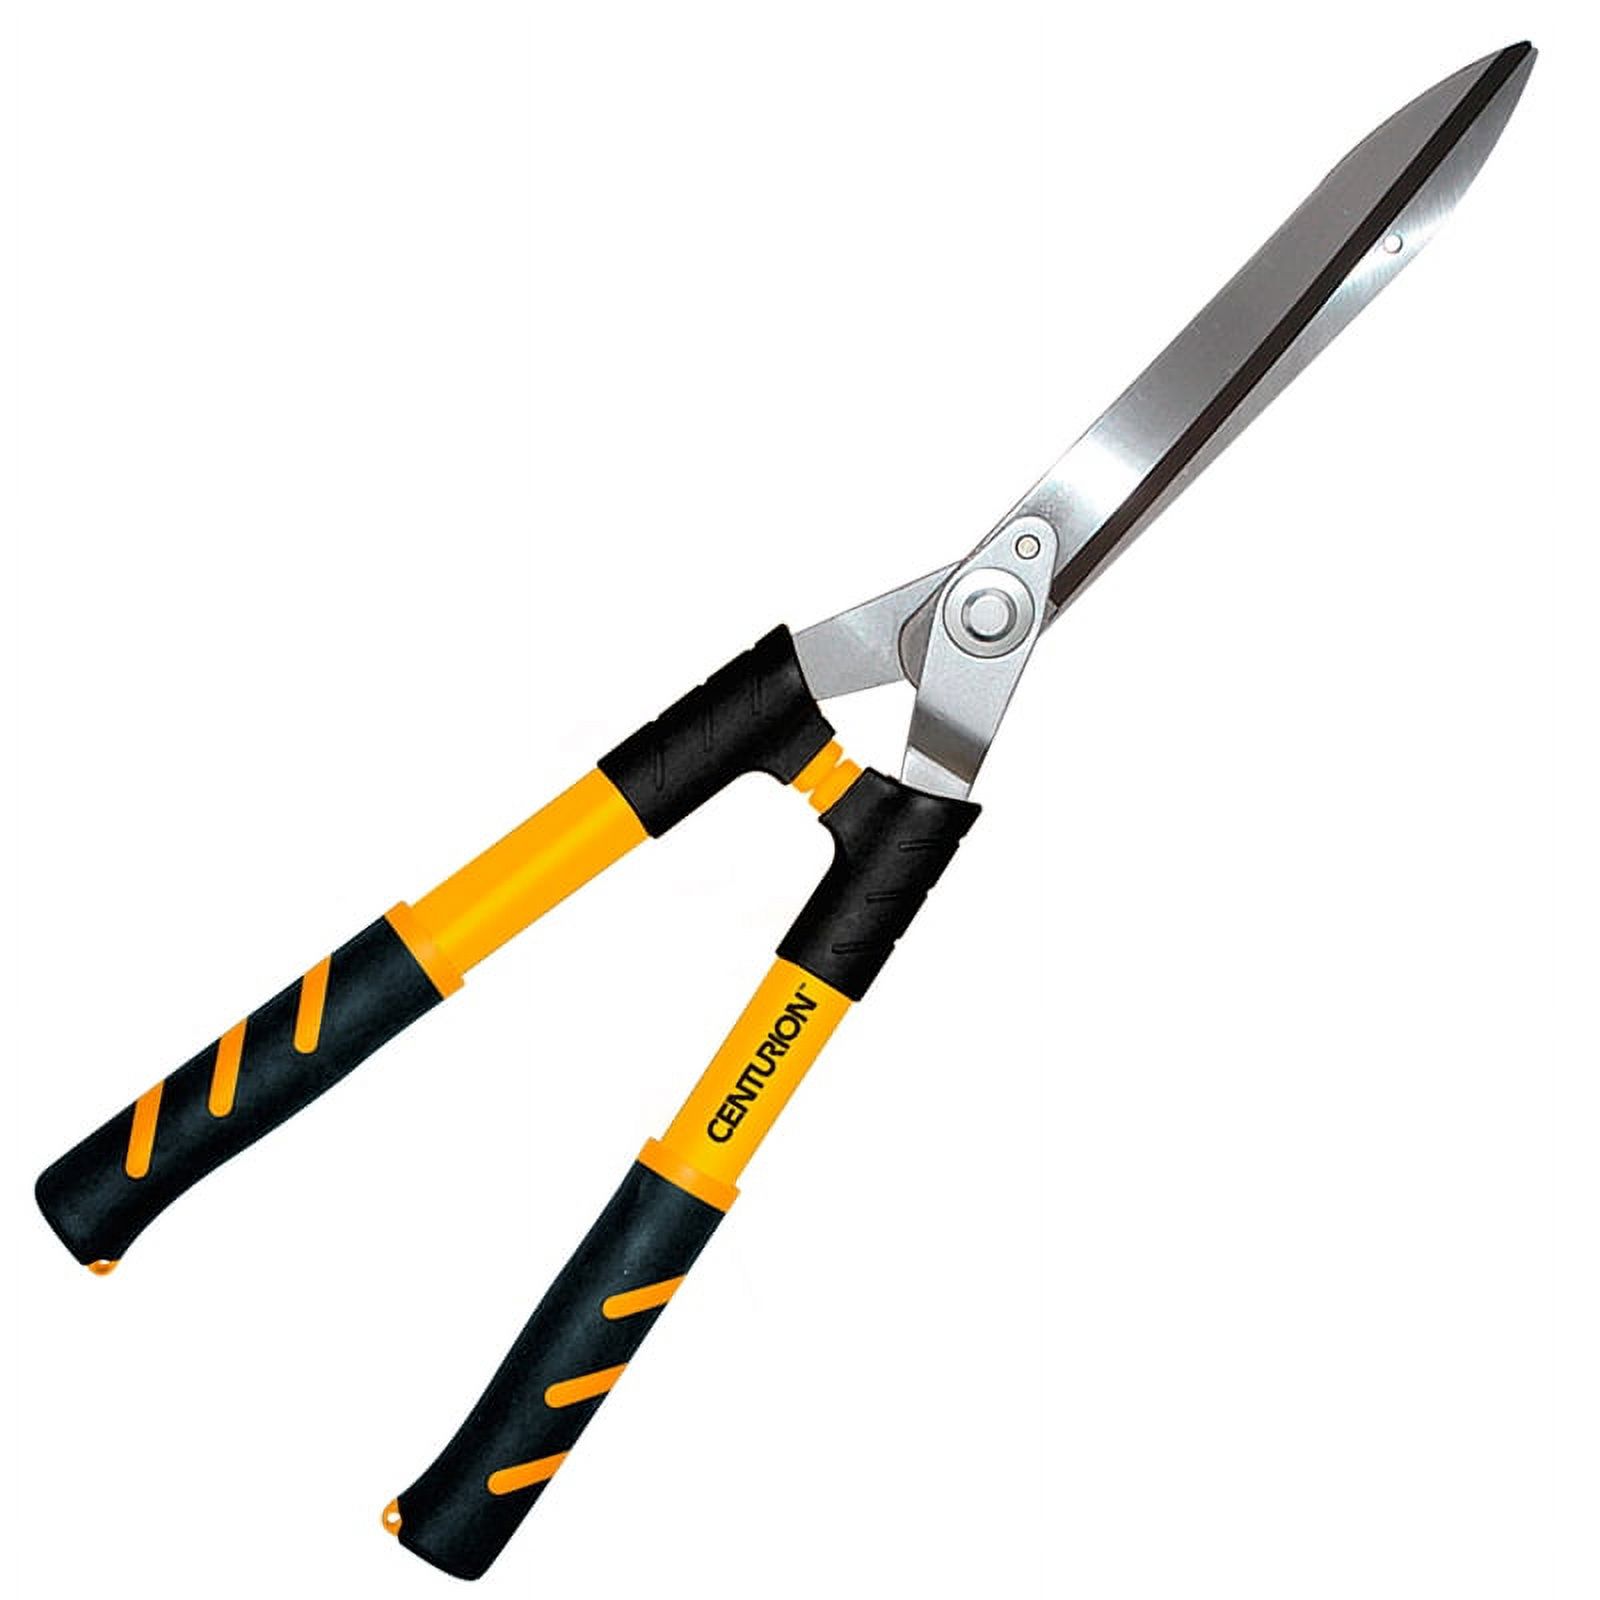 Centurion 208 23.62" X 8.27" X 2.59" Link-Force® Hardened Carbon Steel Hedge Shears - image 1 of 3